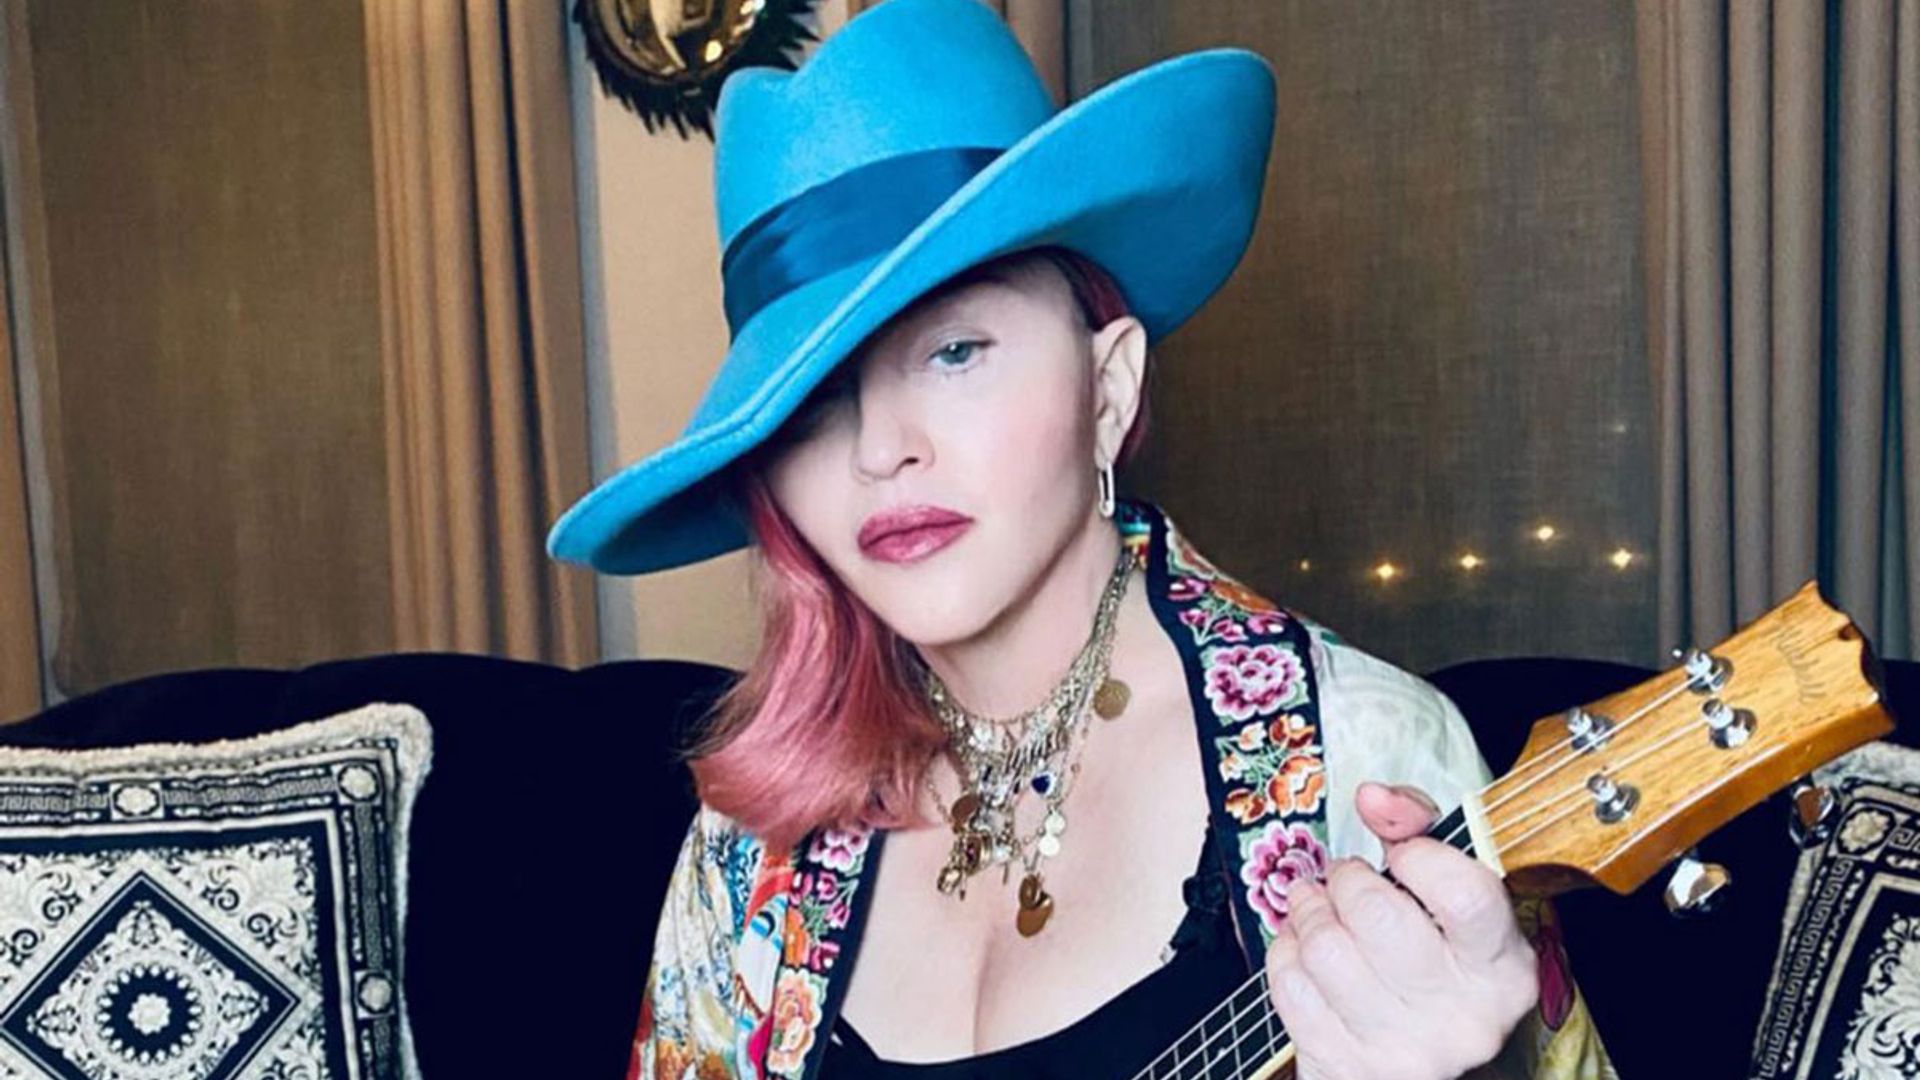 Madonna and her six children pose for rare family picture – fans react